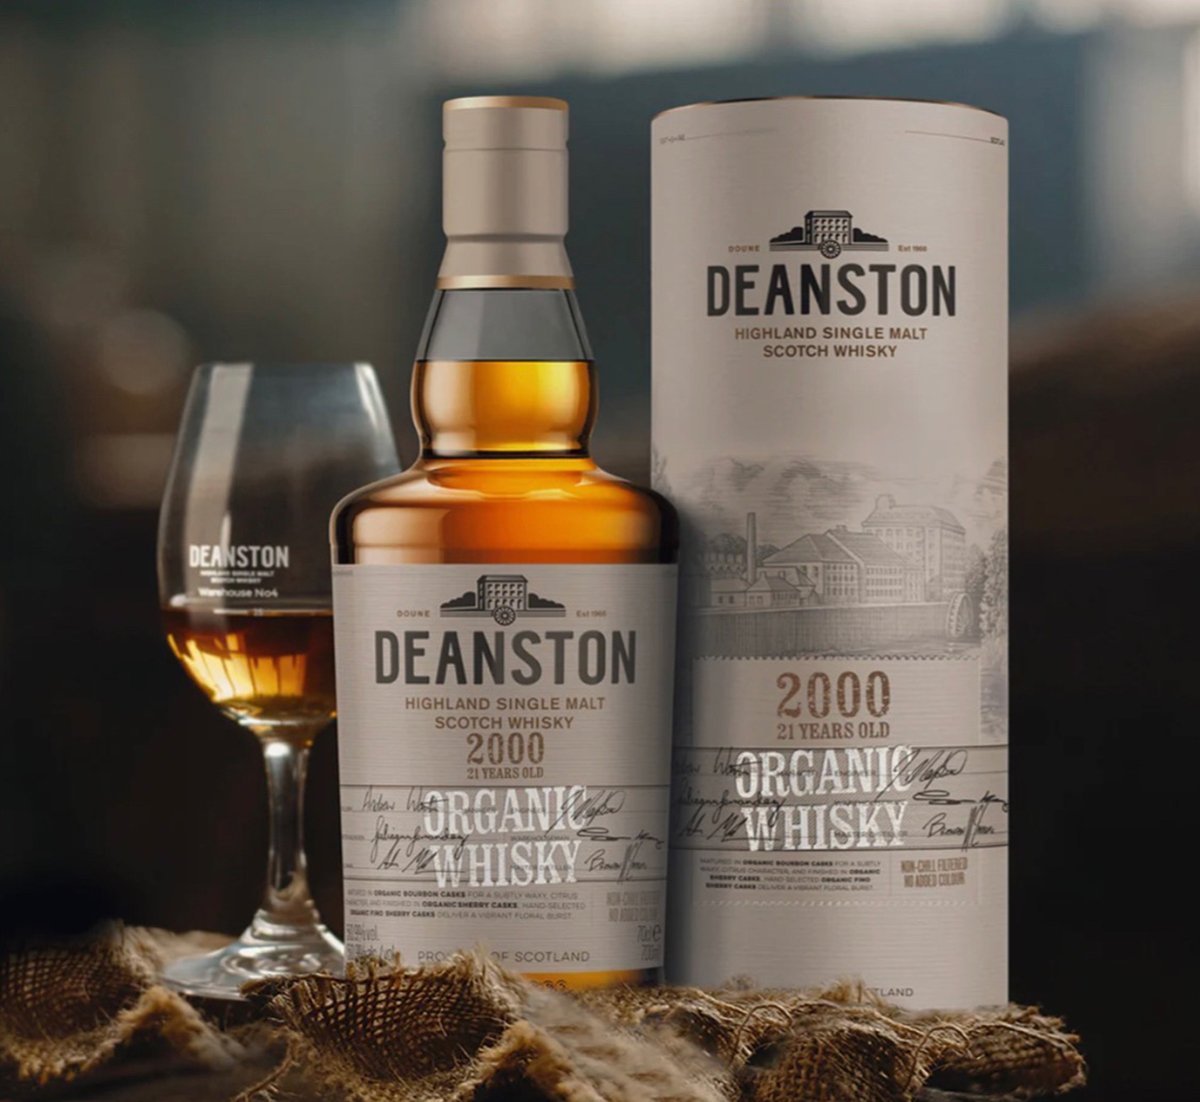 A glass of whiskey next to a bottle and case of Deanston Whiskey